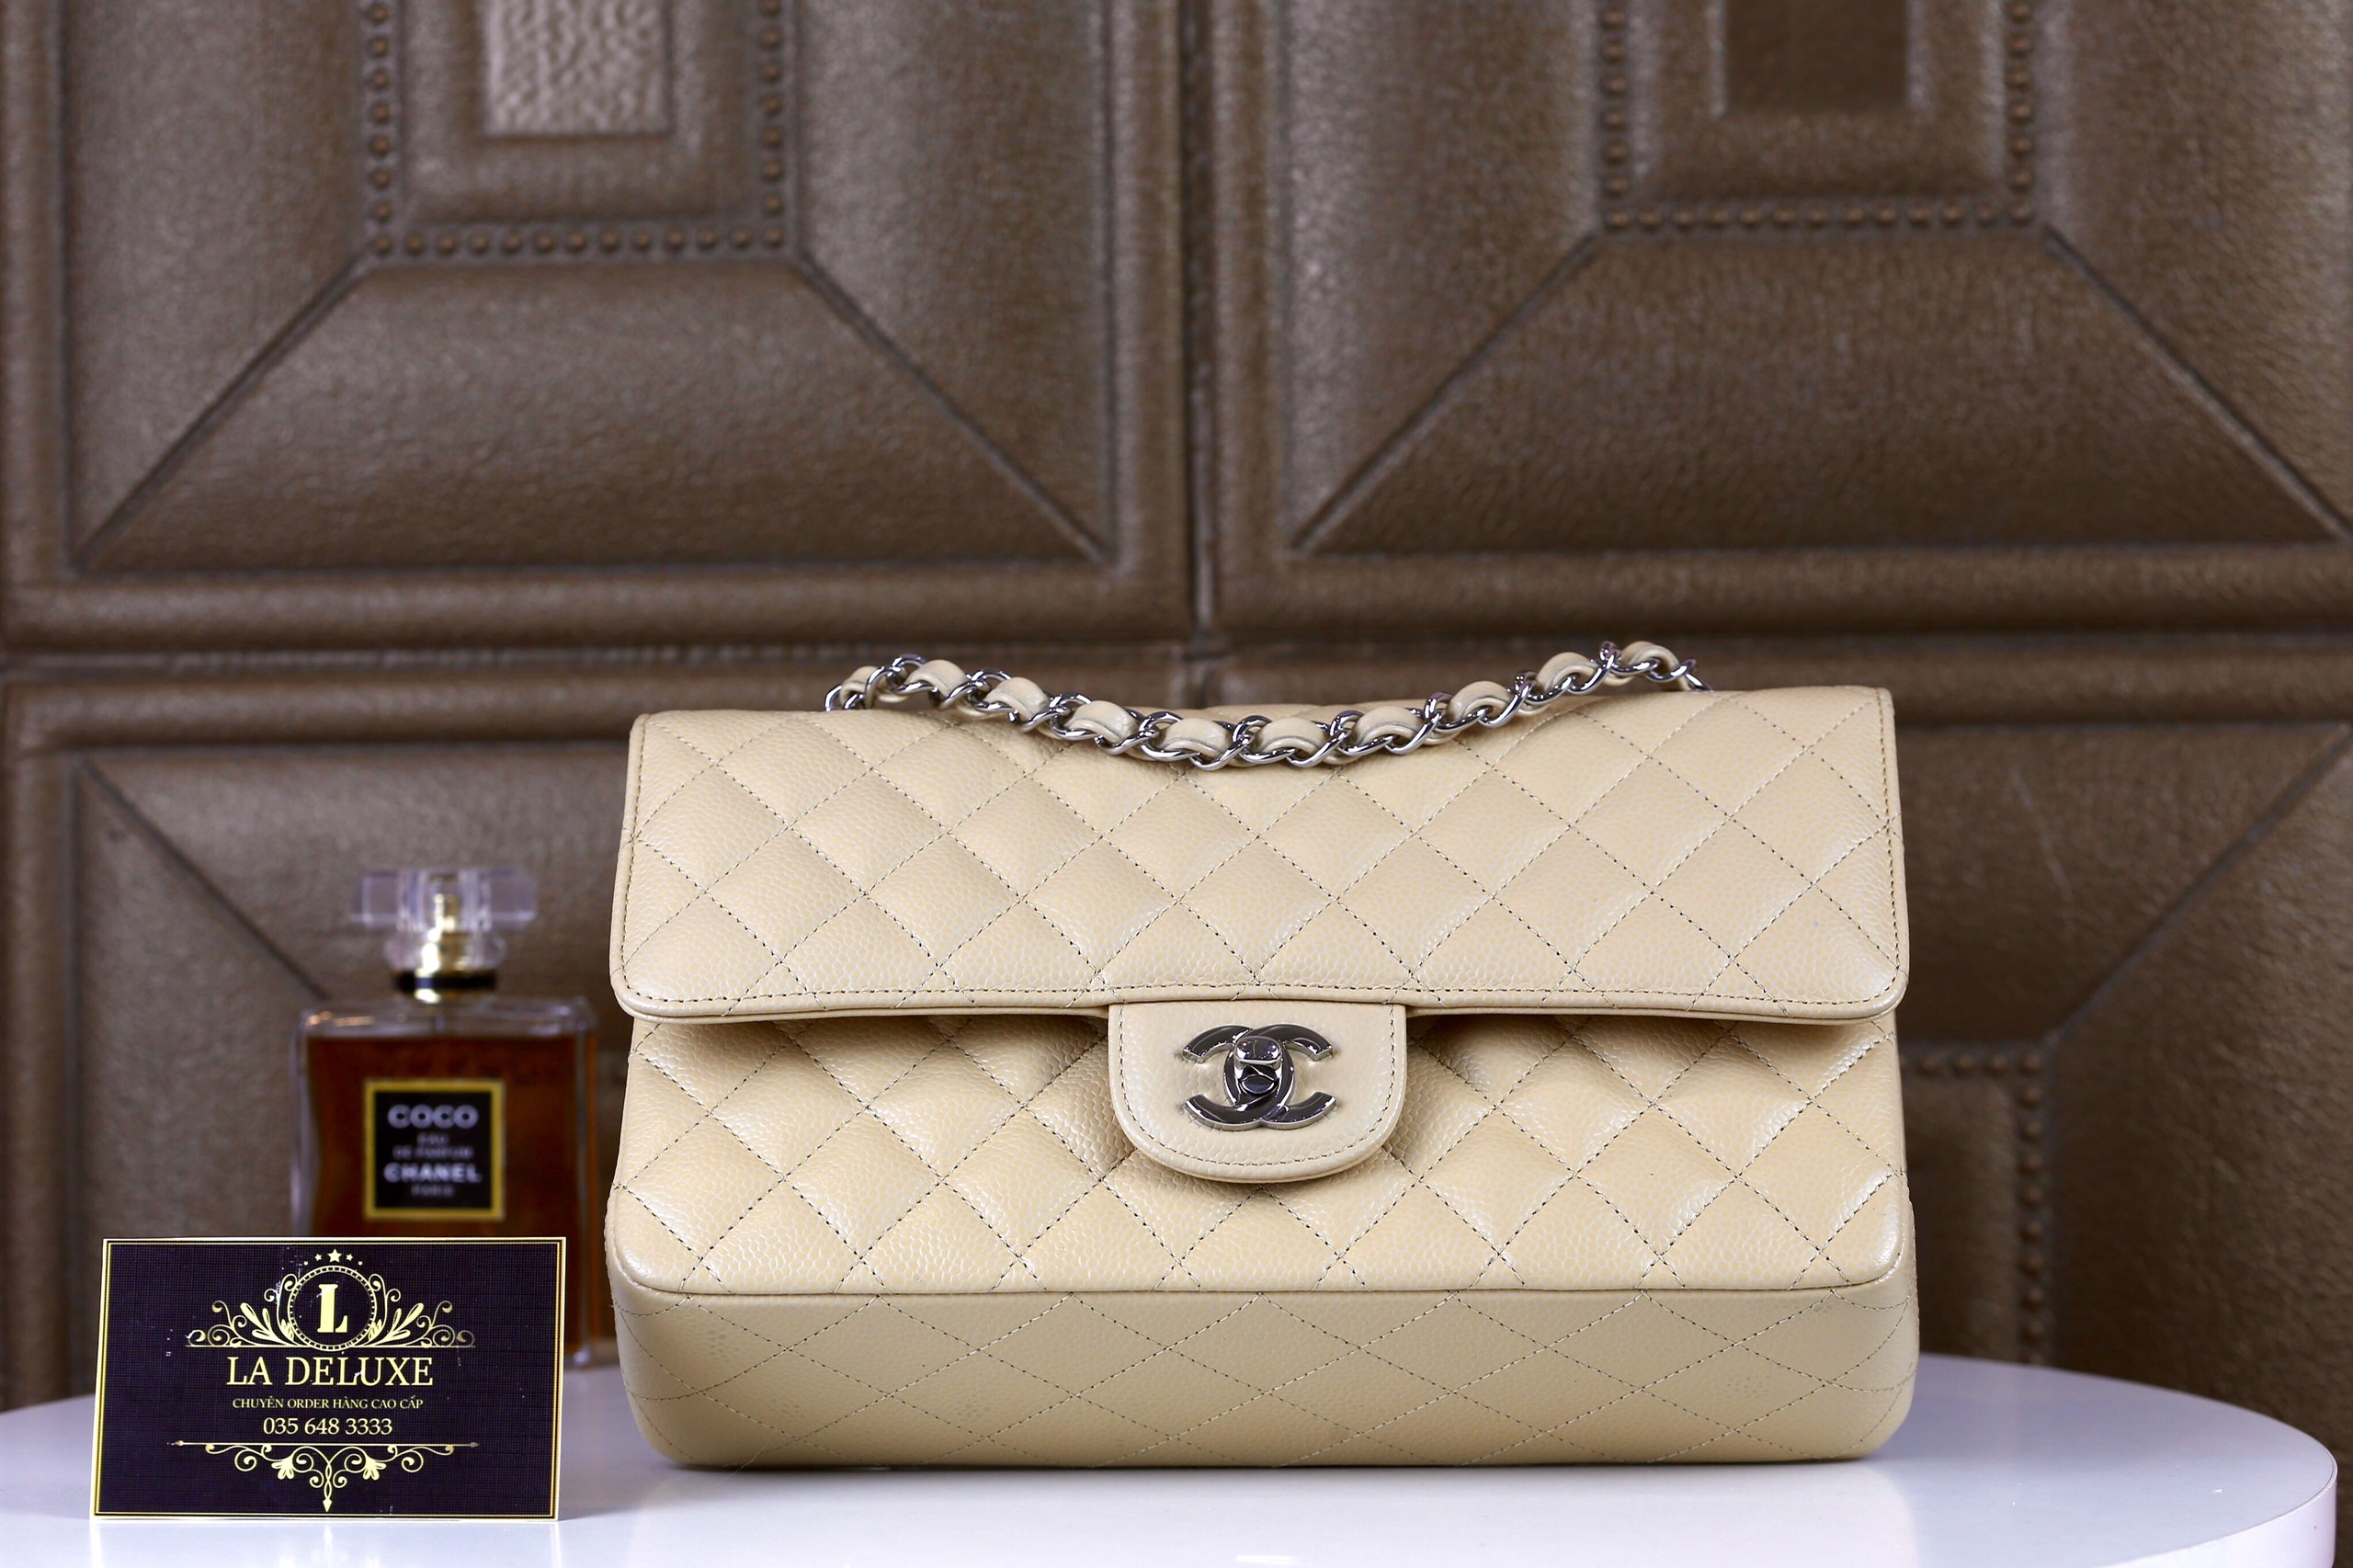 CHANEL CLASSIC FLAP BAG - Be/ Size 25.5 - La Deluxe